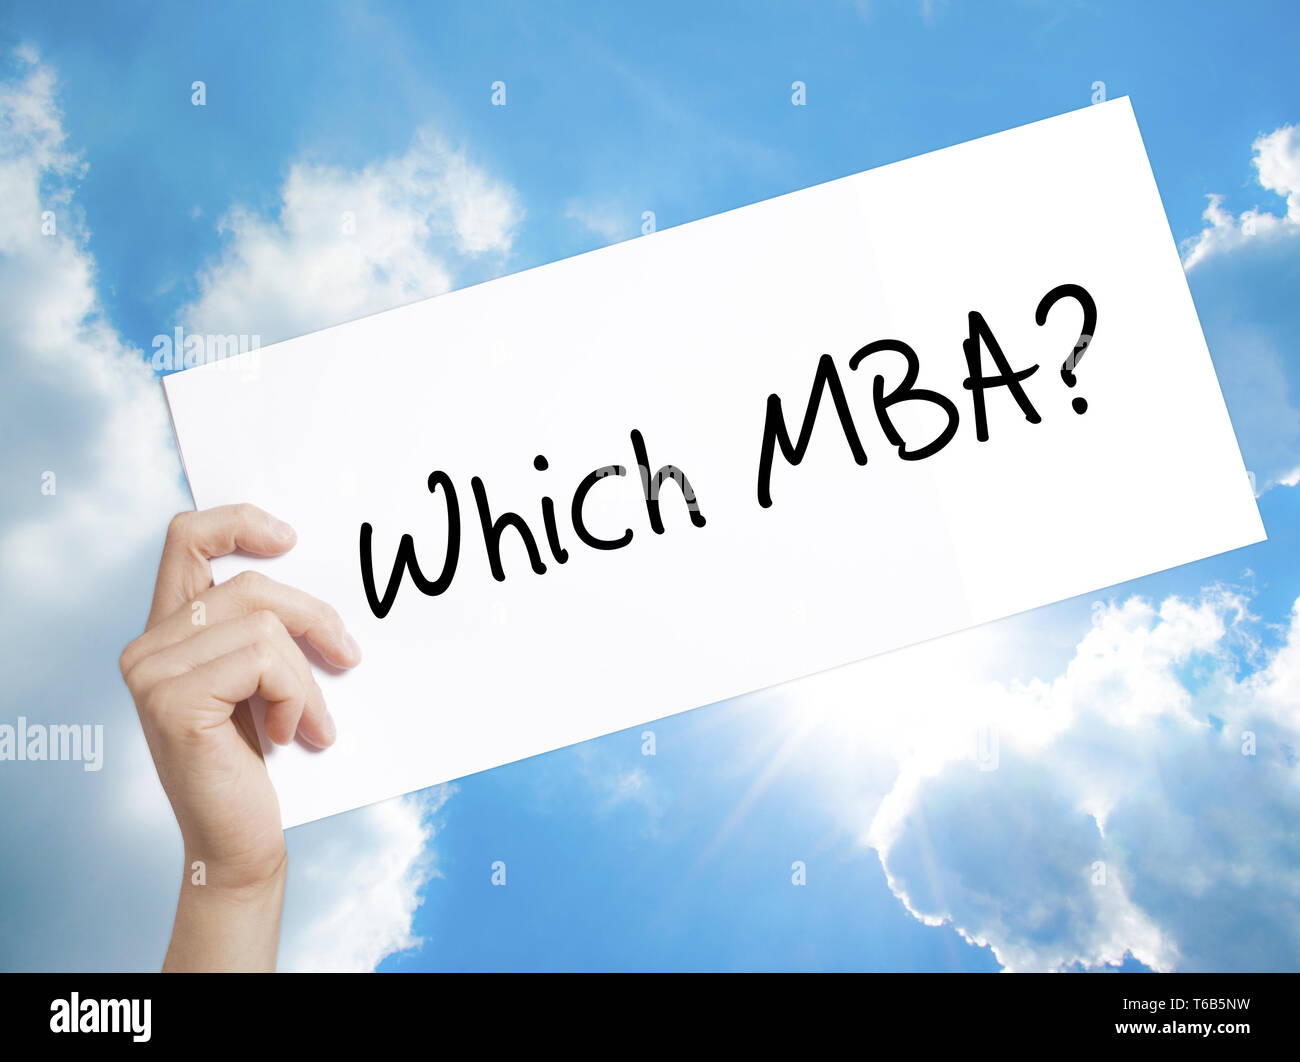 Which MBA? Sign on white paper. Man Hand Holding Paper with text. Isolated on sky background Stock Photo